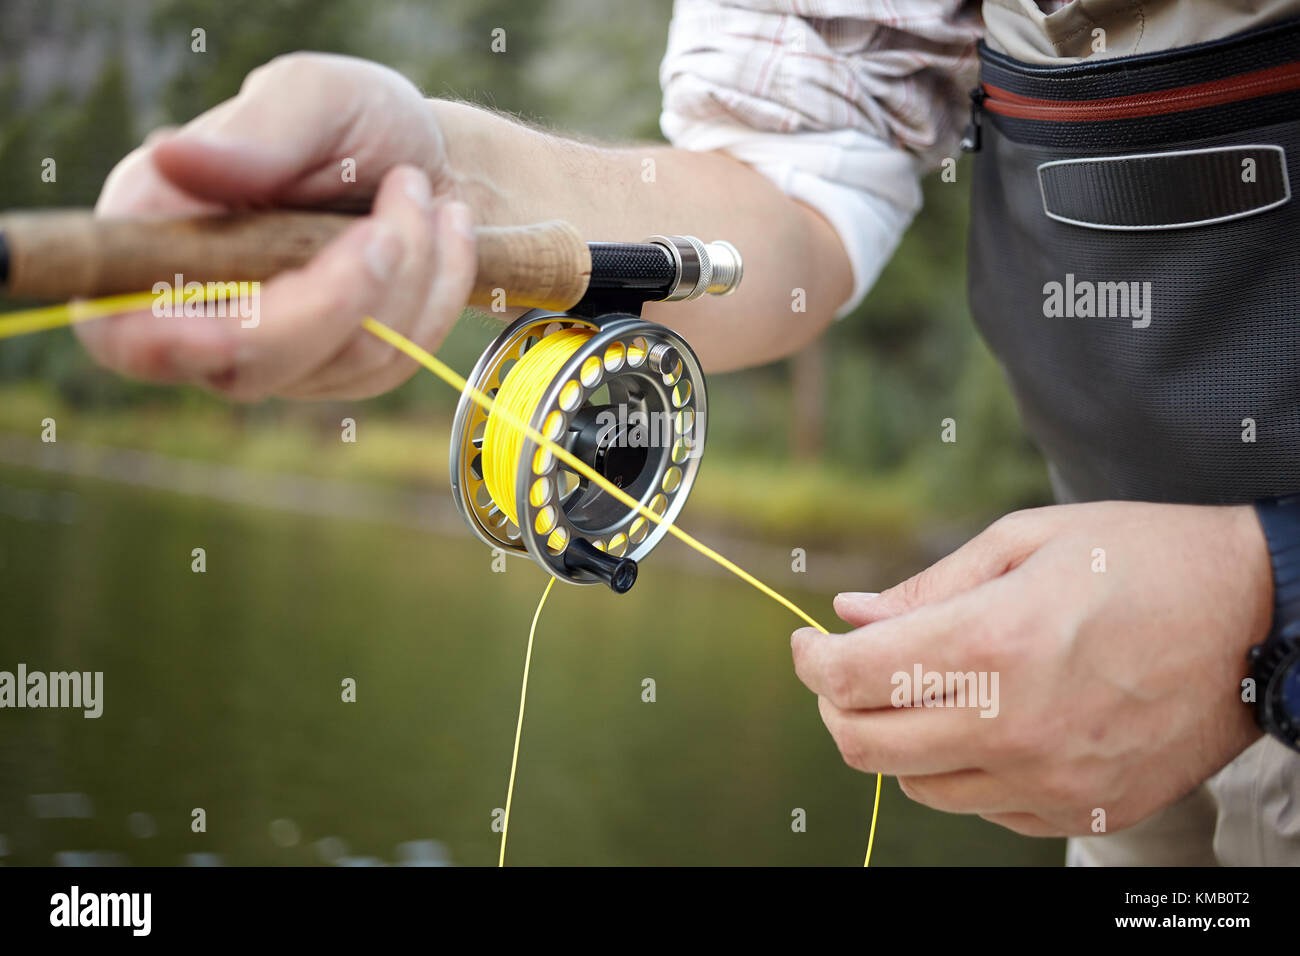 https://c8.alamy.com/comp/KMB0T2/fly-fisherman-using-a-spinning-reel-with-yellow-line-in-a-close-up-KMB0T2.jpg